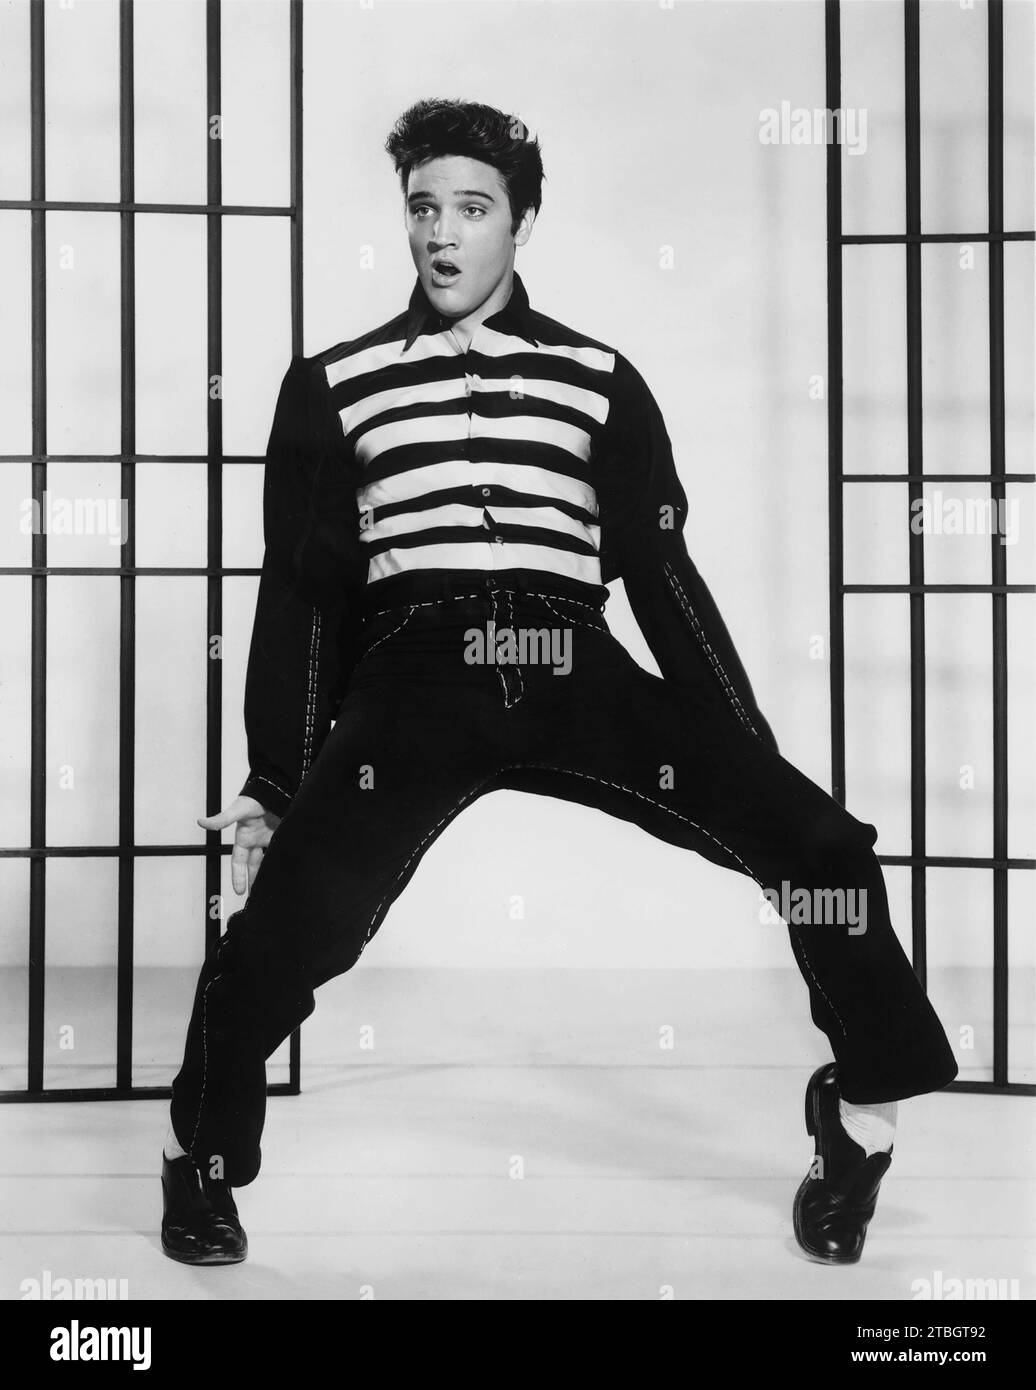 King Rock and Roll - Elvis Presley on the film set of Jailhouse Rock, 1957. Stock Photo